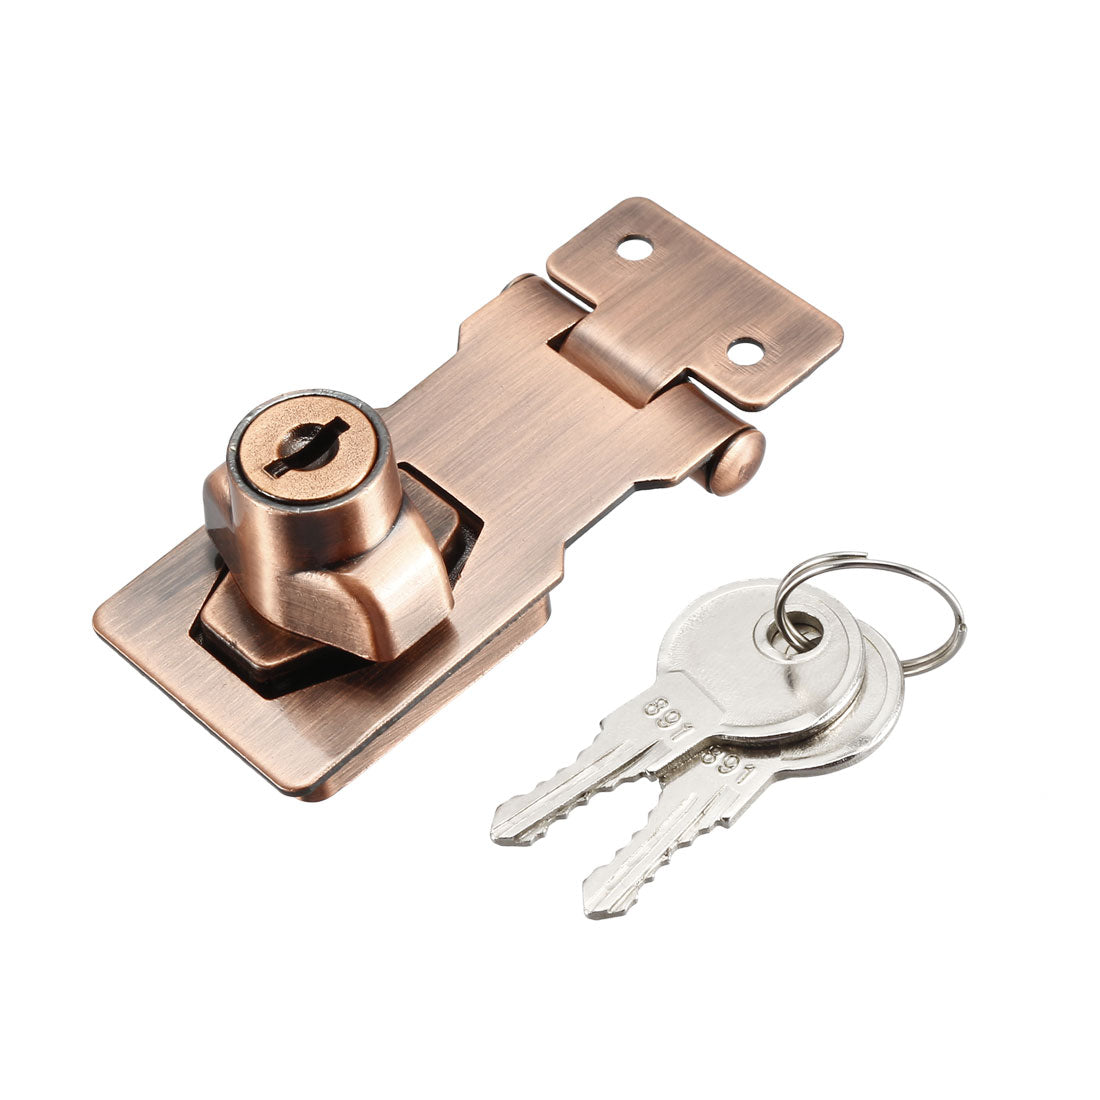 uxcell Uxcell Keyed Hasp Lock 80mm Twist Knob Keyed Locking Hasp for Door Cabinet Keyed Different Red Copper Tone